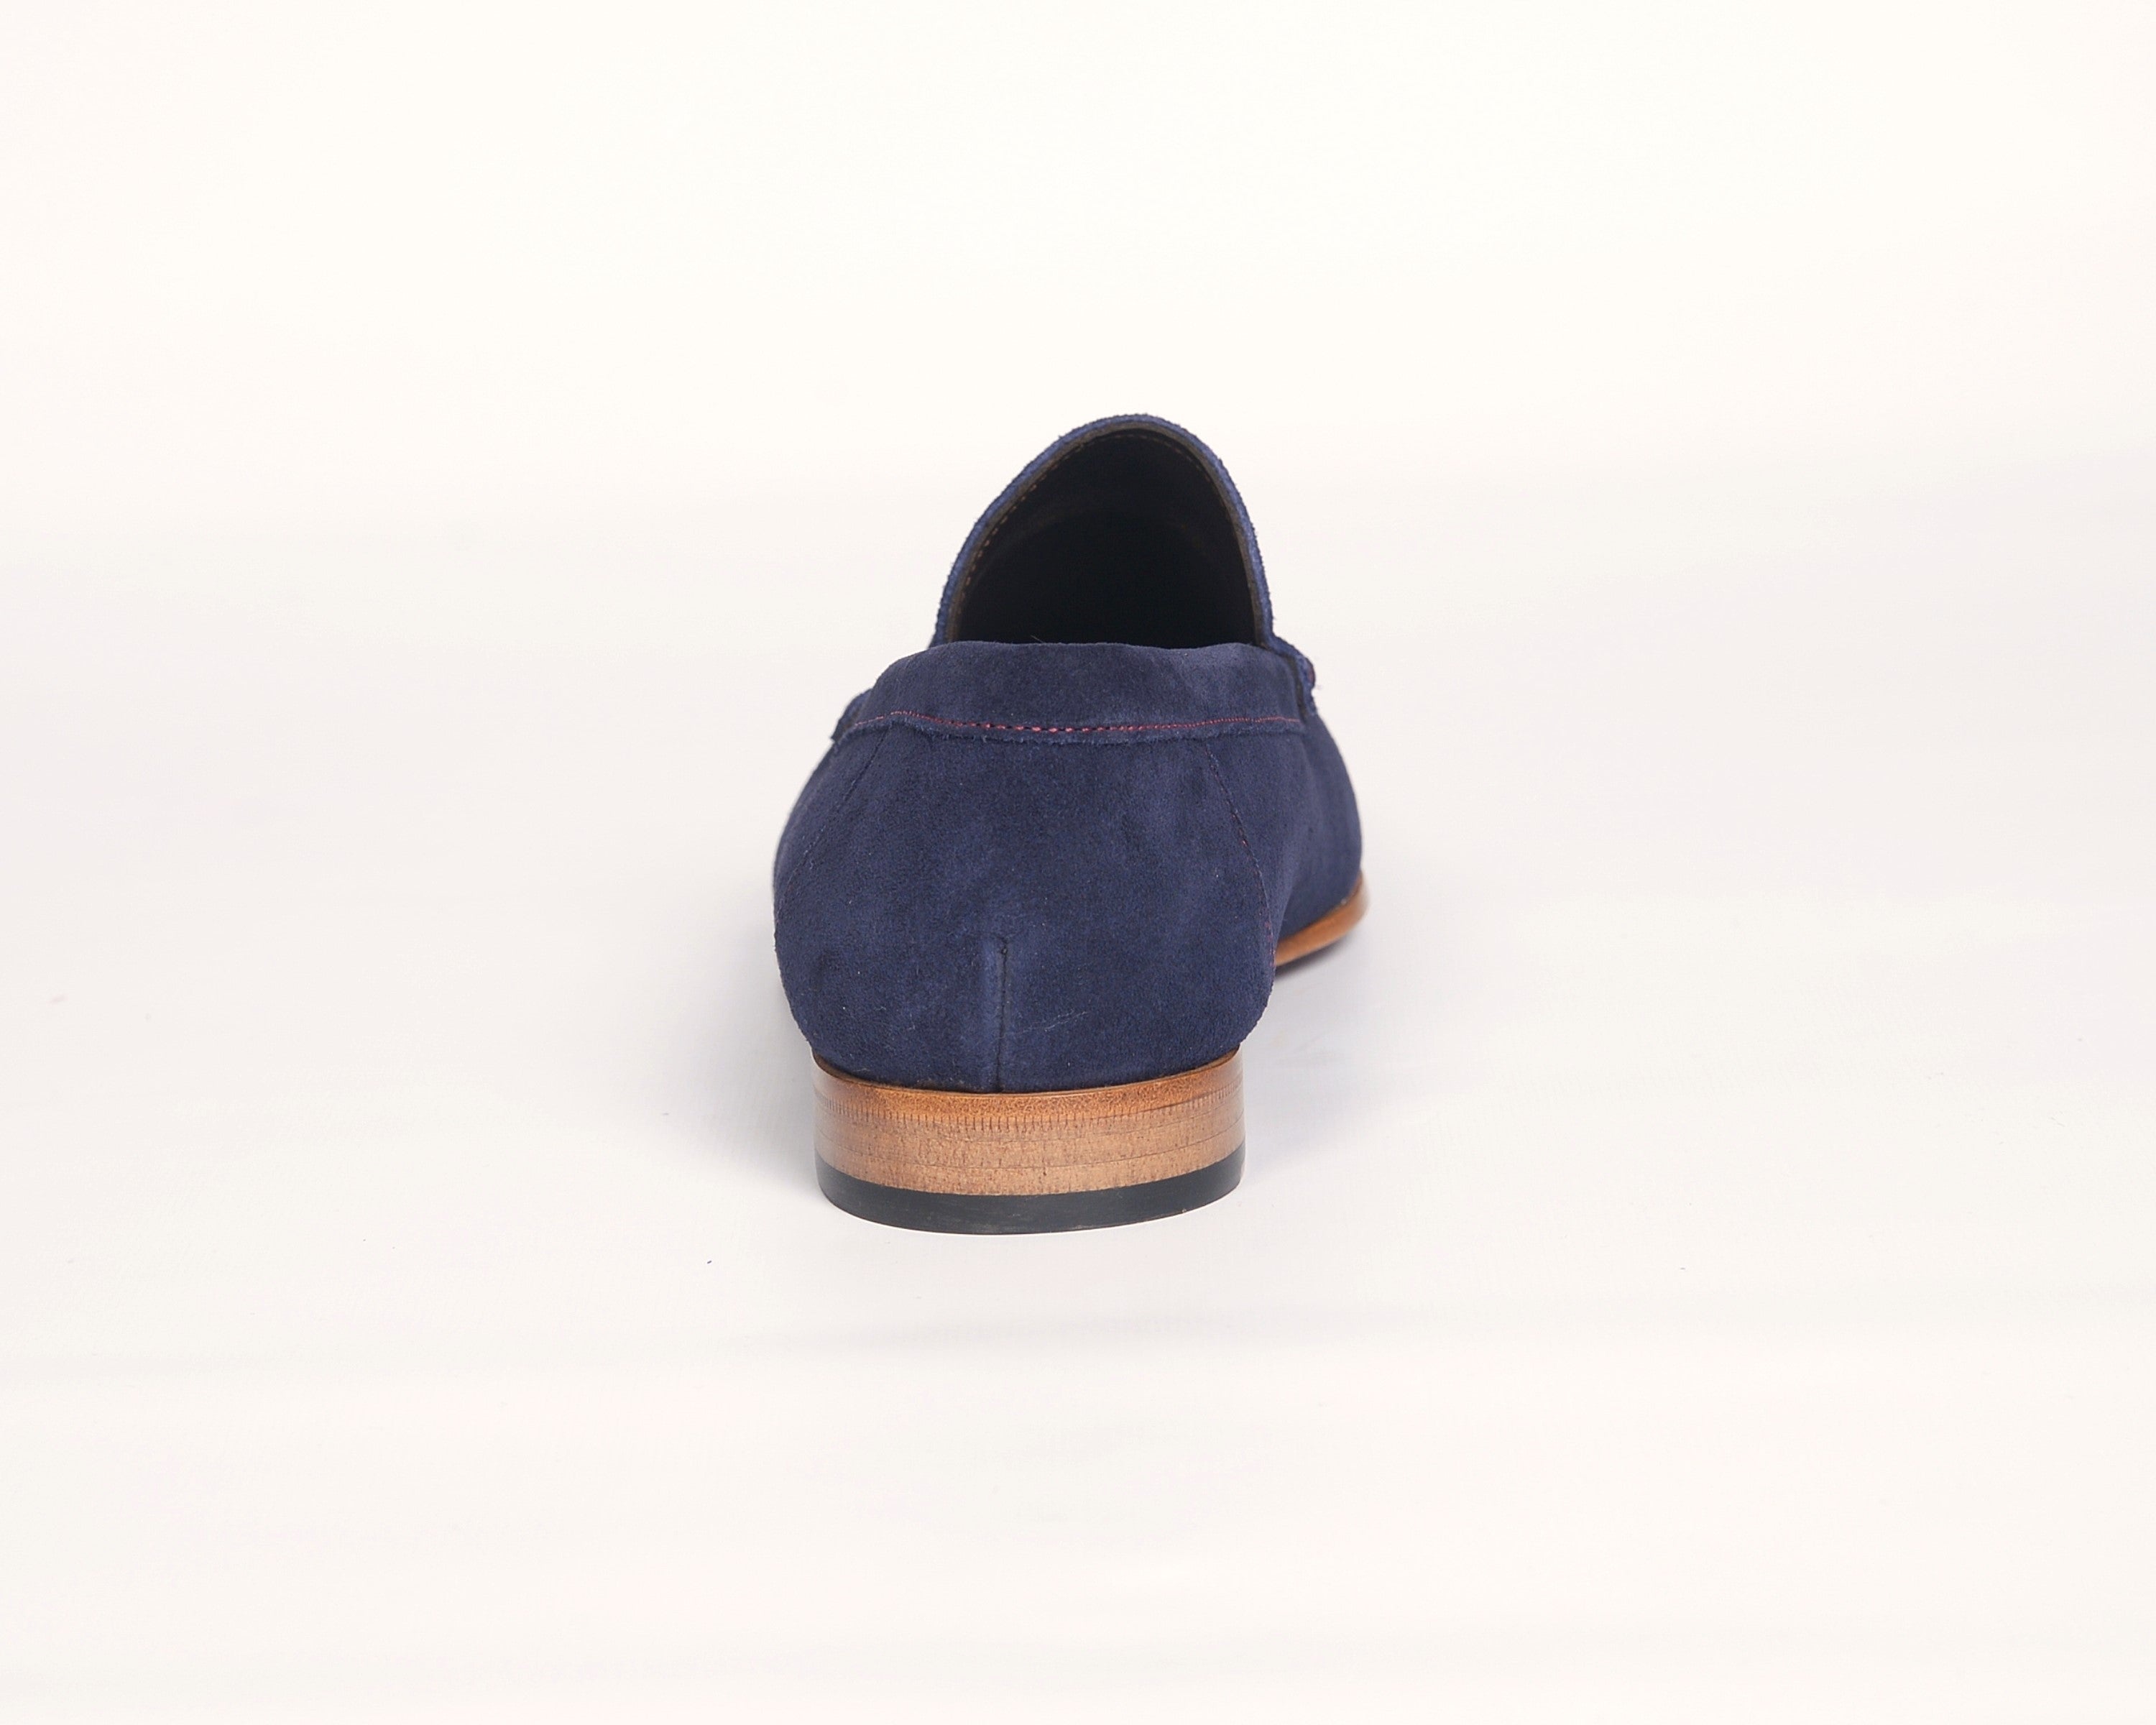 AN Moccasin Loafer (Blue Suede)